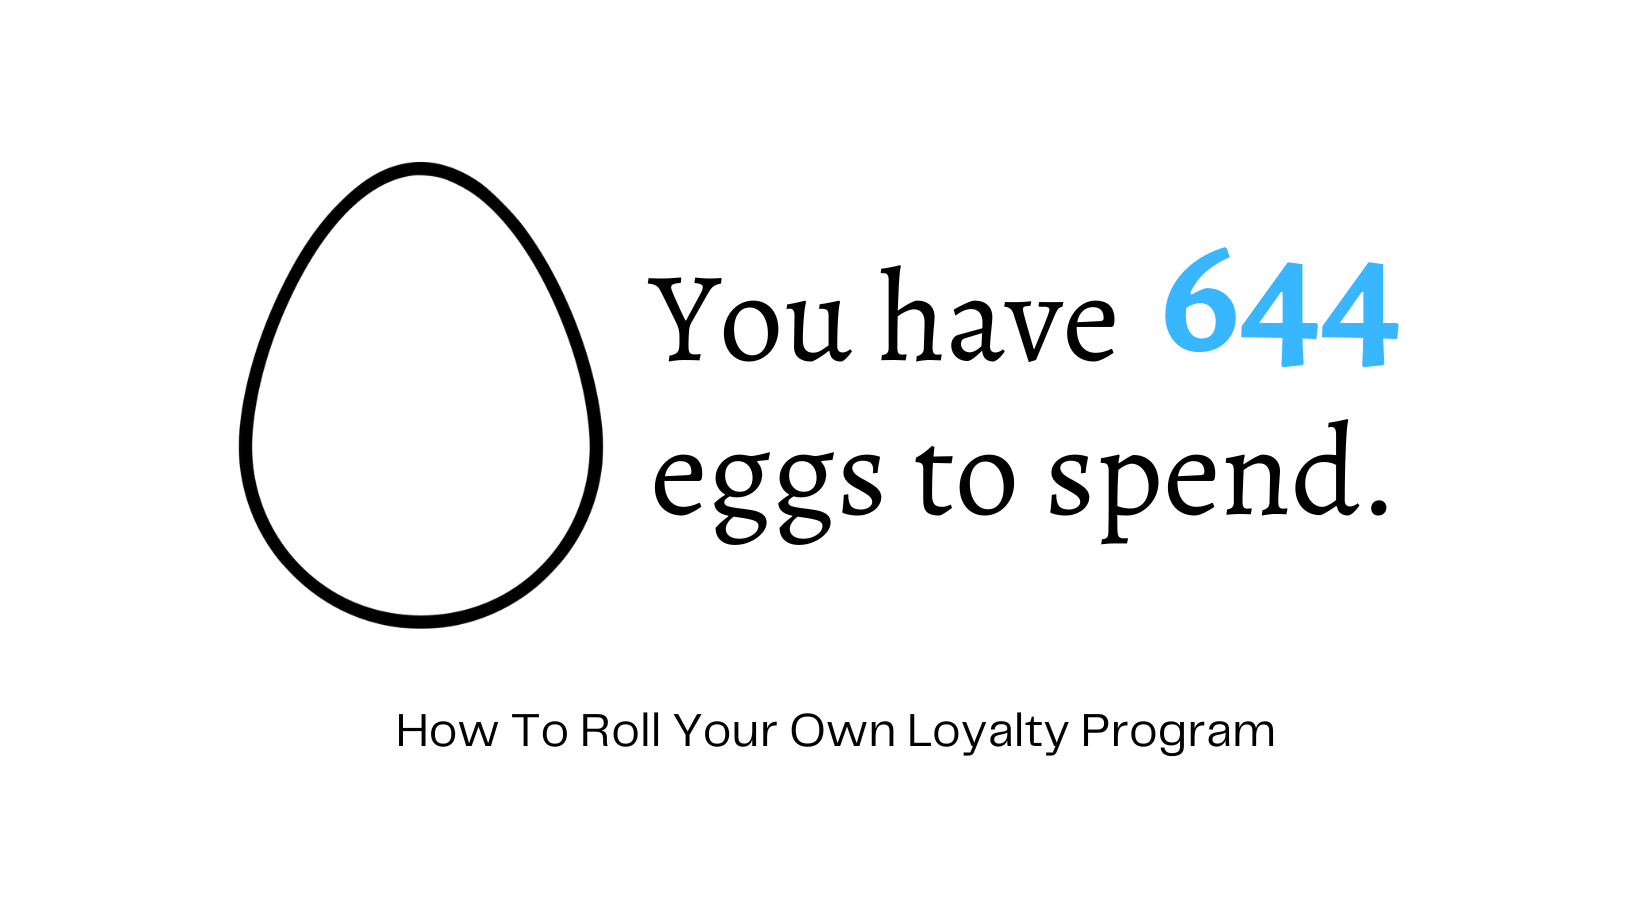 How to Roll Your Own Loyalty Program